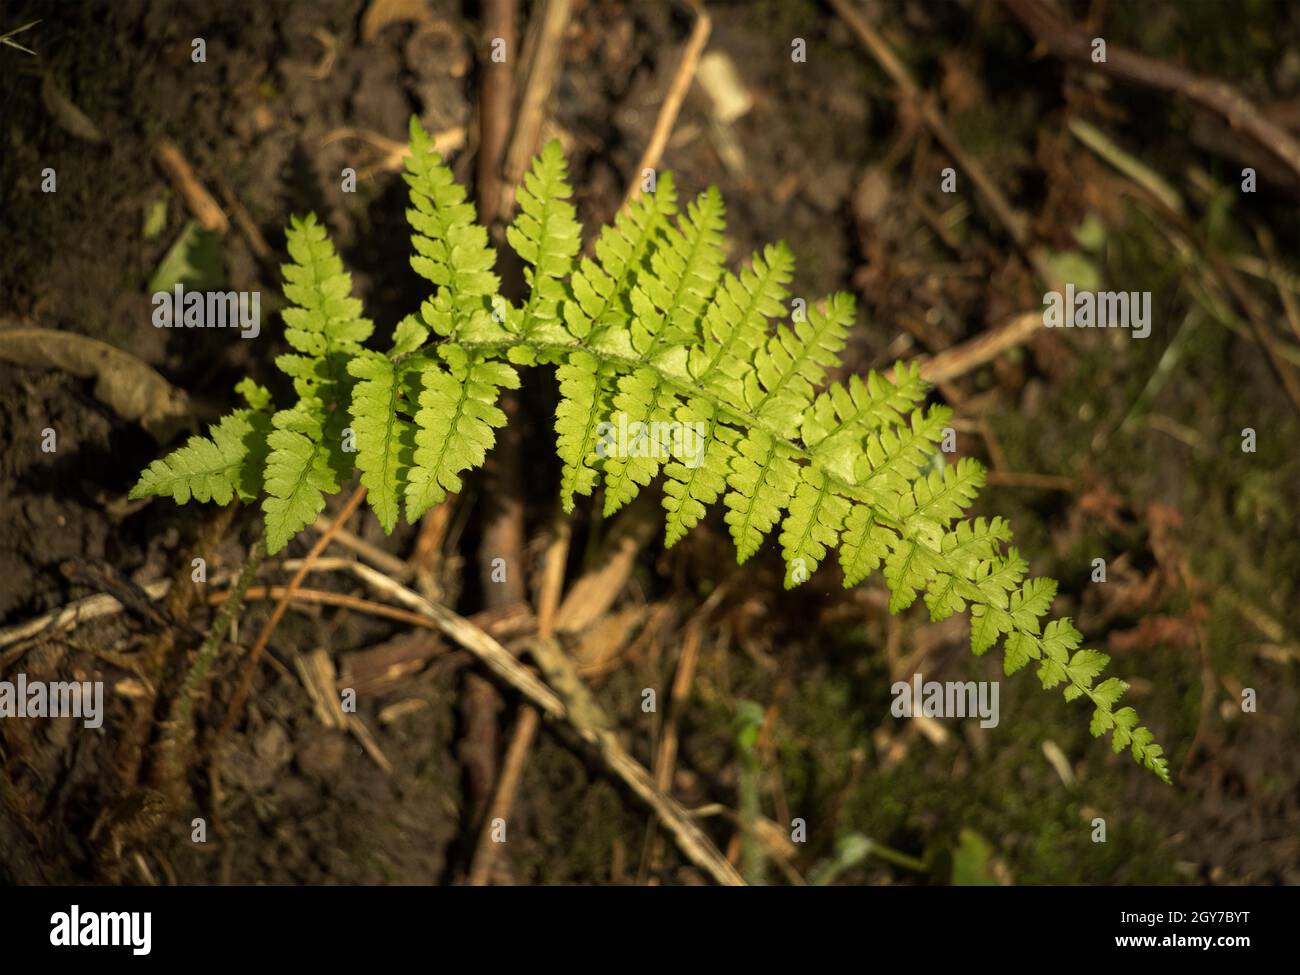 Not dying back till late winter the Broad Buckler Fern is common to wet woodlands, hedgerows and rock ledges in Northern England. Stock Photo